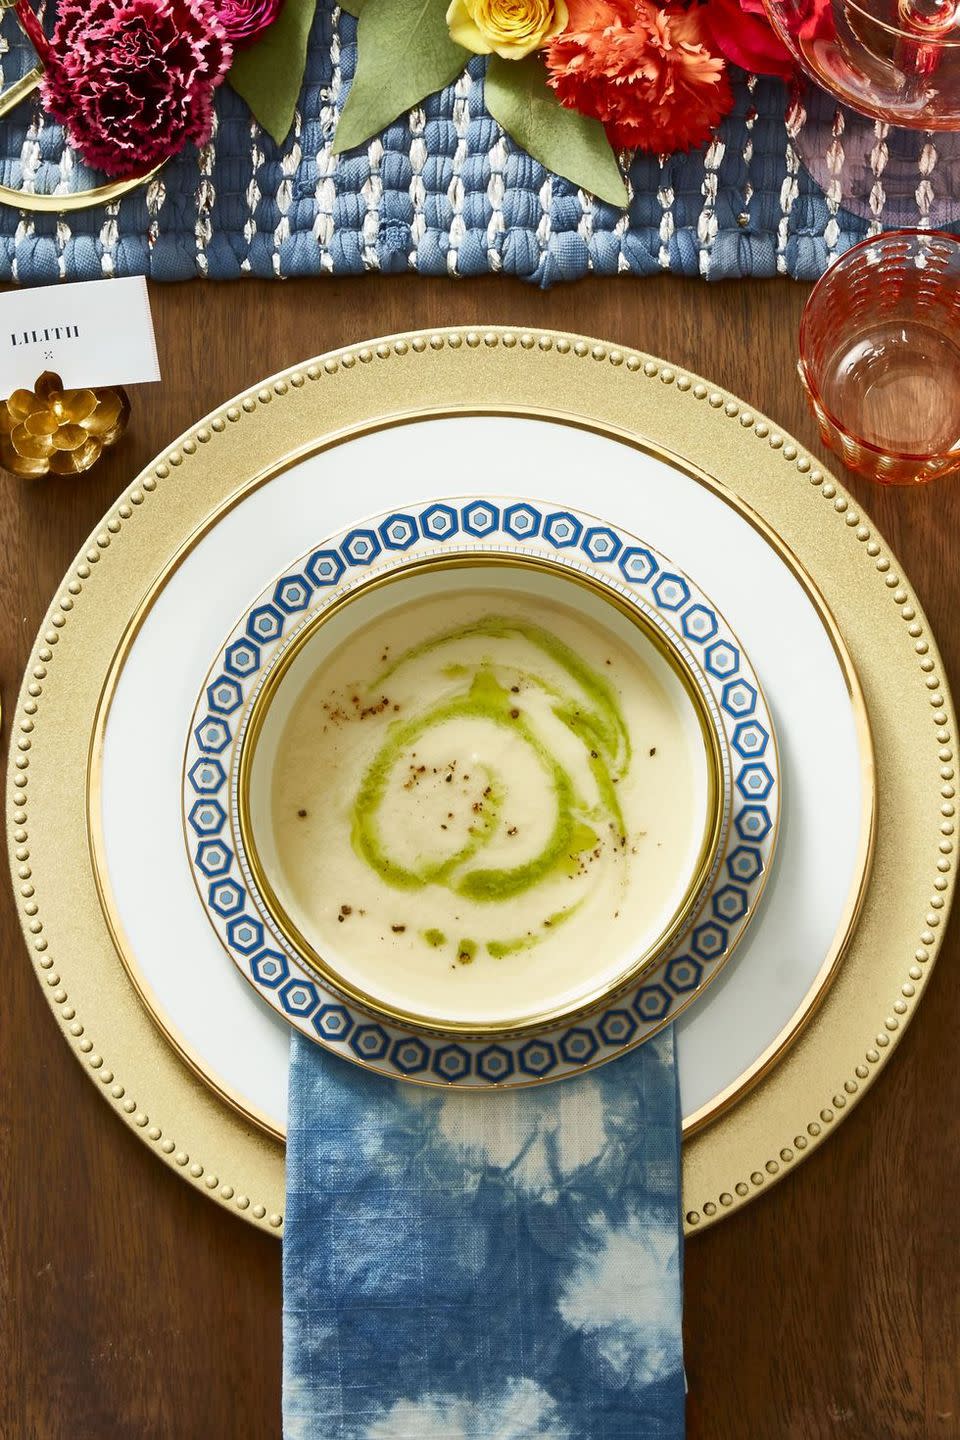 <p>If you're looking for a quick and cozy appetizer, start Christmas dinner with a veggie-loaded soup.</p><p><a href="https://www.goodhousekeeping.com/food-recipes/easy/a46630/20-minute-cauliflower-soup-recipe/" rel="nofollow noopener" target="_blank" data-ylk="slk:Get the recipe »" class="link rapid-noclick-resp"><em>Get the <em>recipe</em> »</em></a><br></p><p><strong>RELATED:</strong> <a href="https://www.goodhousekeeping.com/food-recipes/easy/g921/easy-winter-soups/" rel="nofollow noopener" target="_blank" data-ylk="slk:10 Simple Soups for the Chilliest Days" class="link rapid-noclick-resp">10 Simple Soups for the Chilliest Days</a></p>